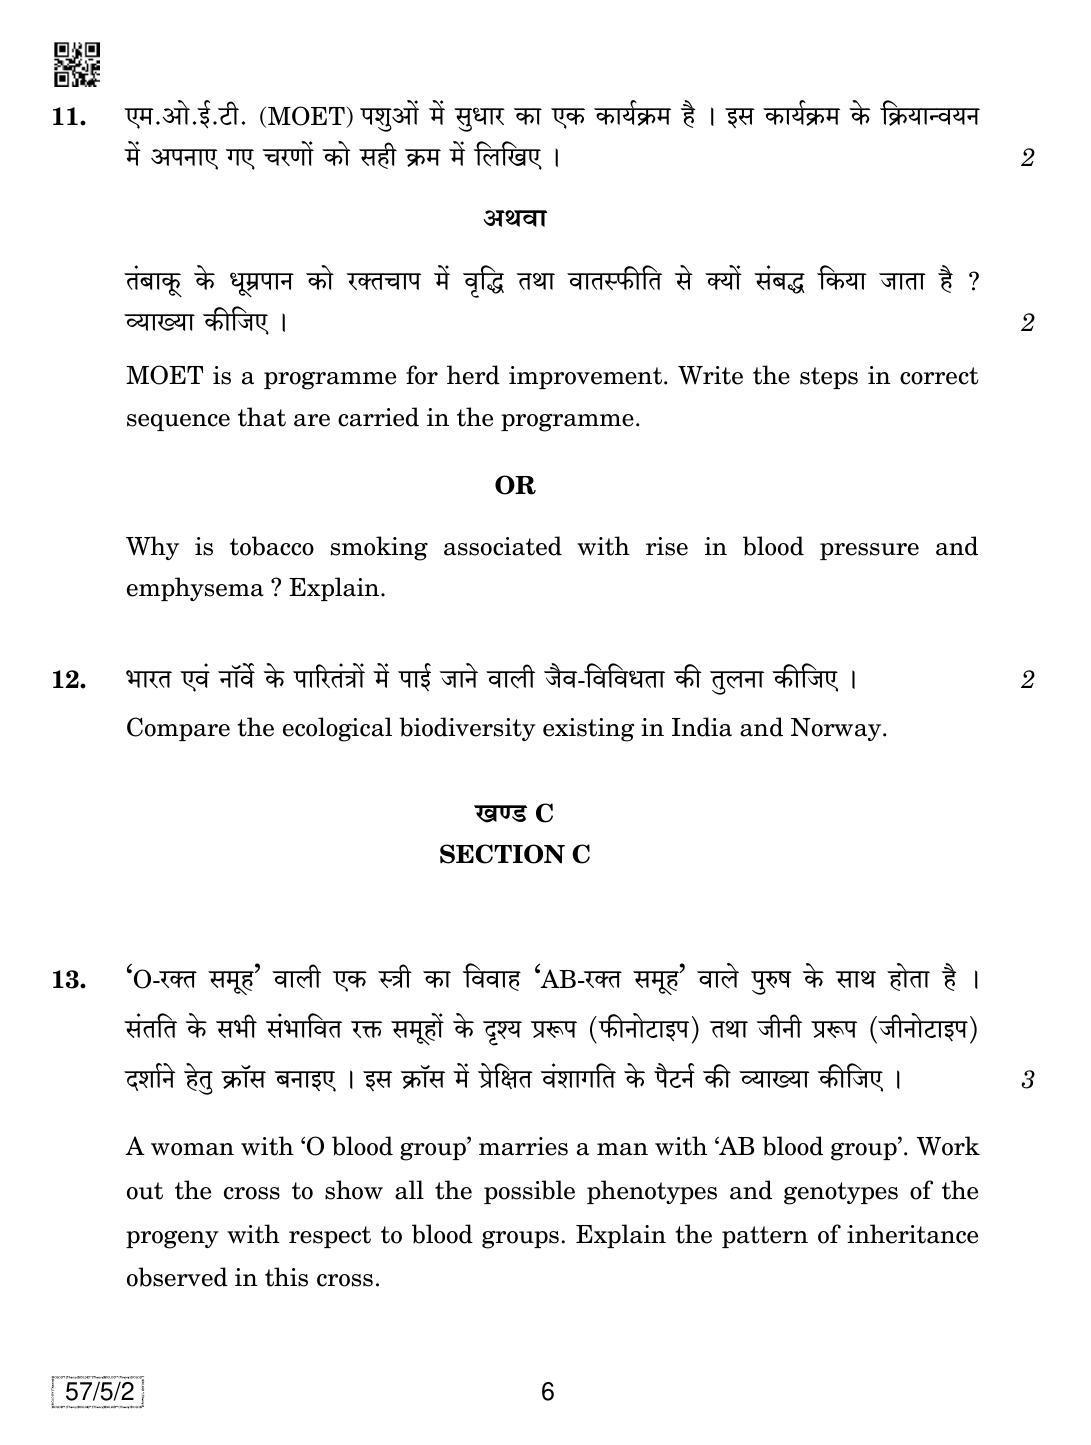 CBSE Class 12 57-5-2 Biology 2019 Question Paper - Page 6